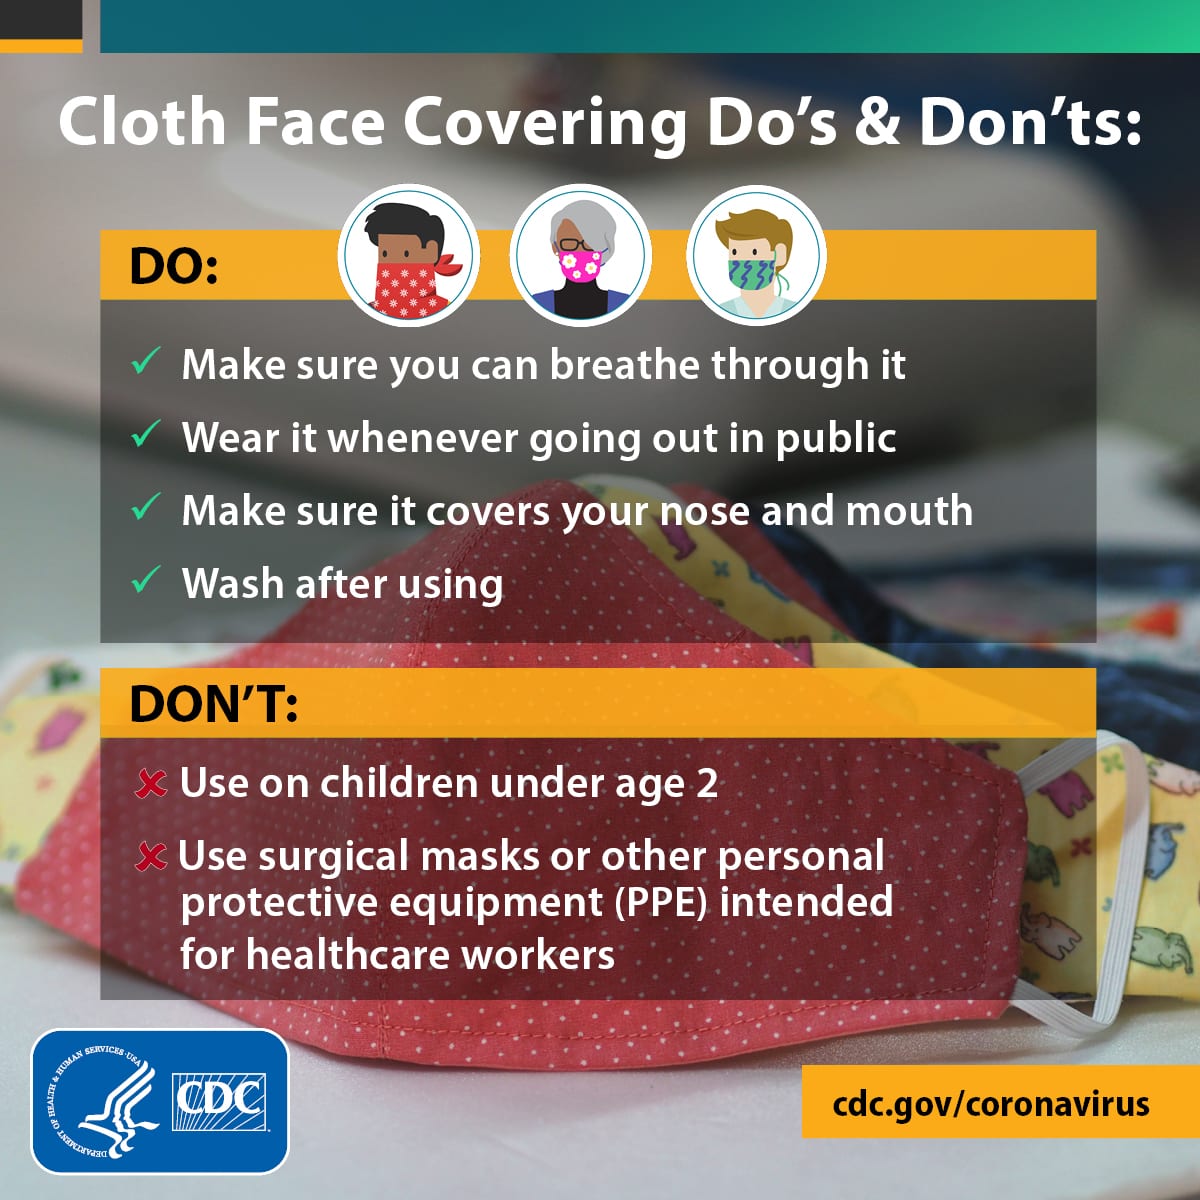 Cloth Face Covering Do's and Don'ts (CDC Social Media Toolkit)